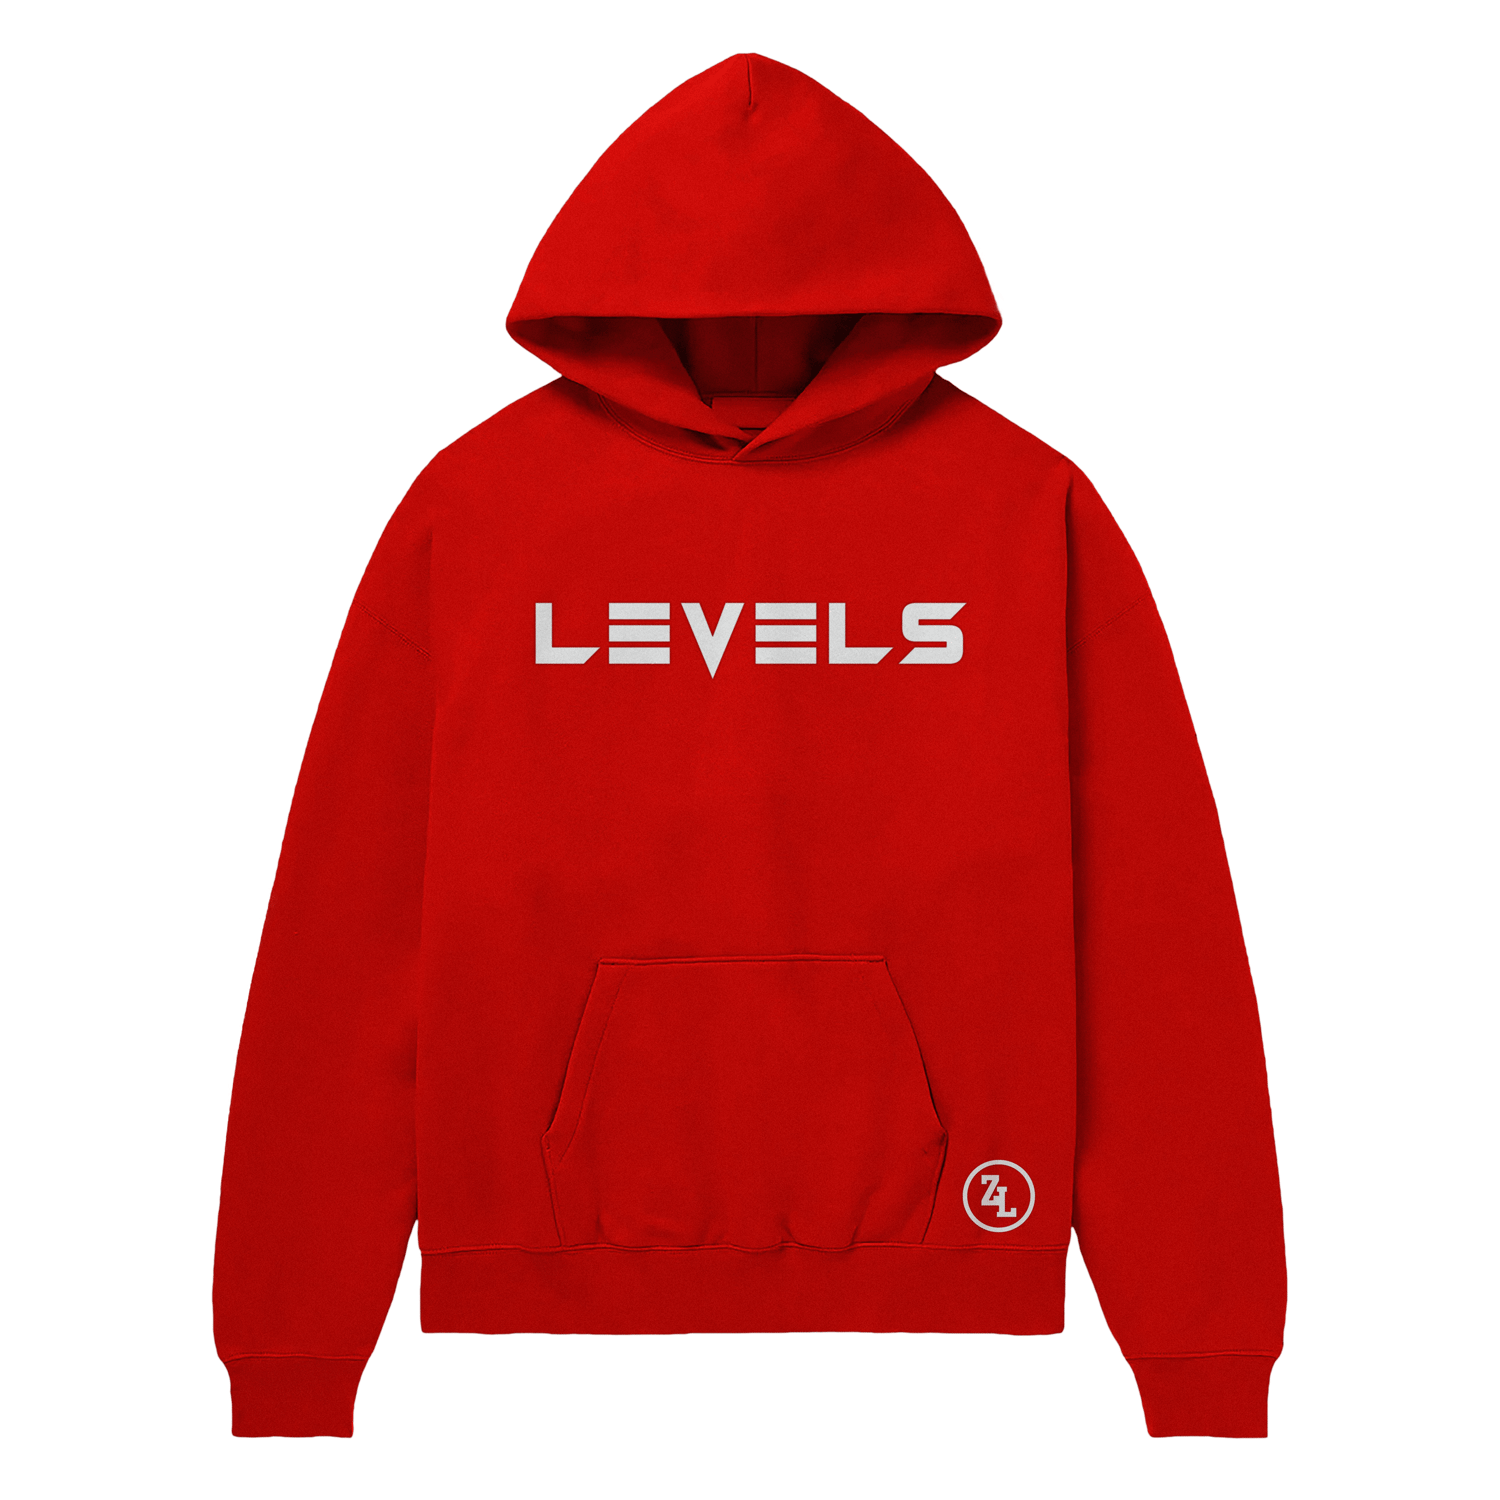 Image of "Levels" Hoodies (click for more colors)